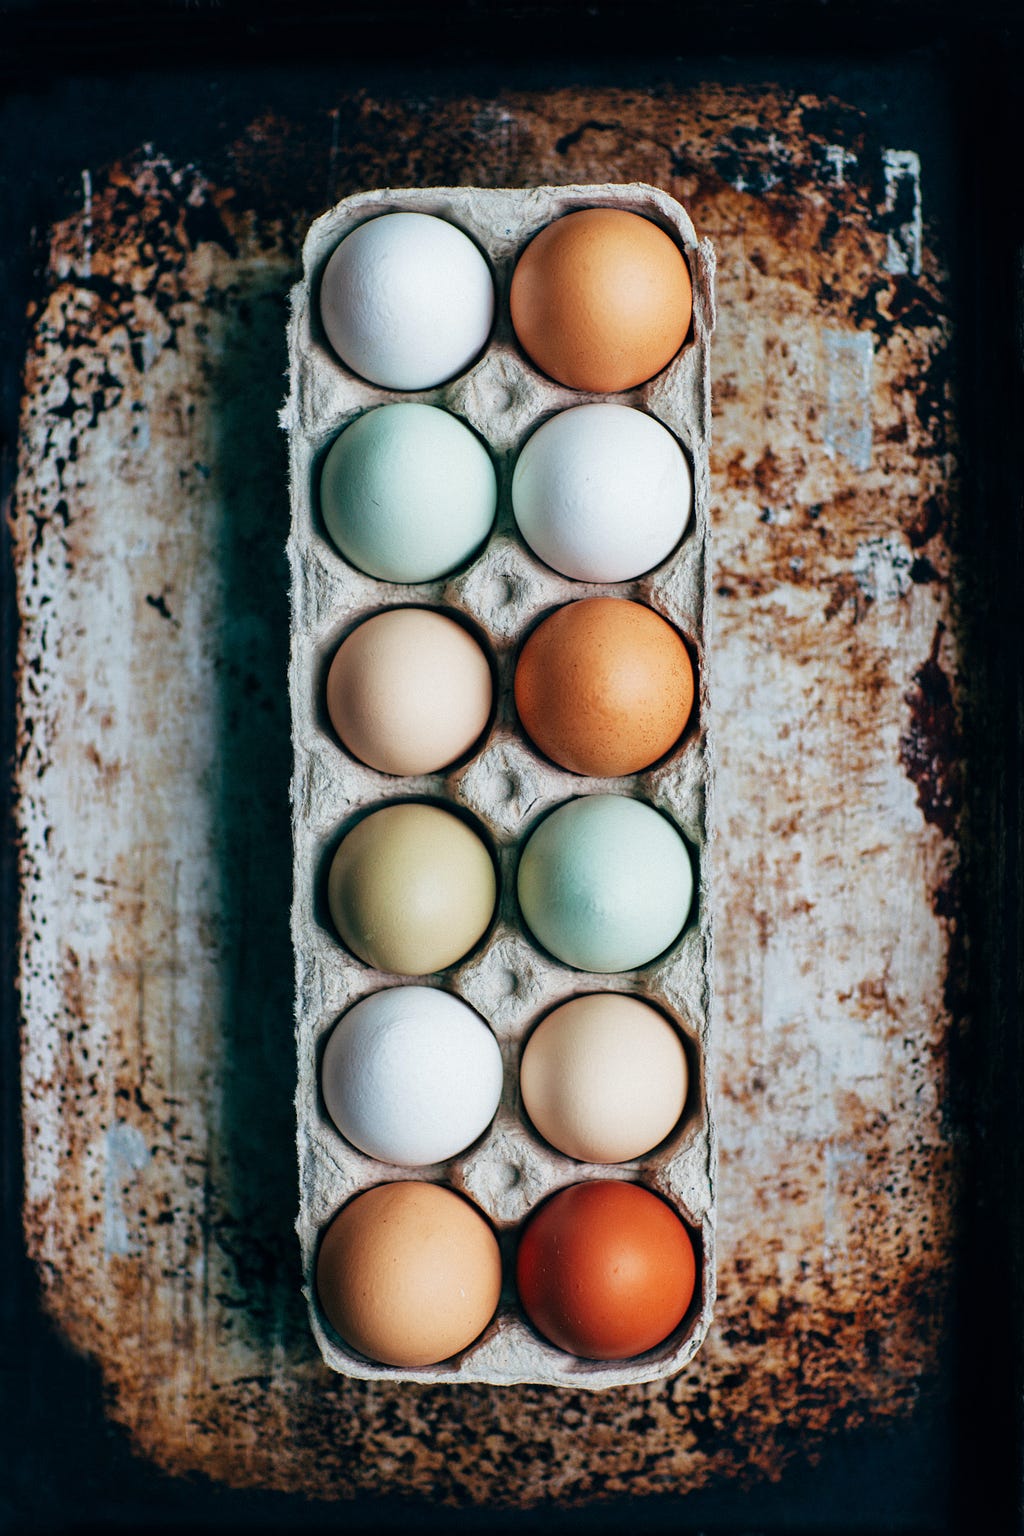 A picture of eggs of different colors. Symbolizes that a team can have different disciplines or nationalities present.